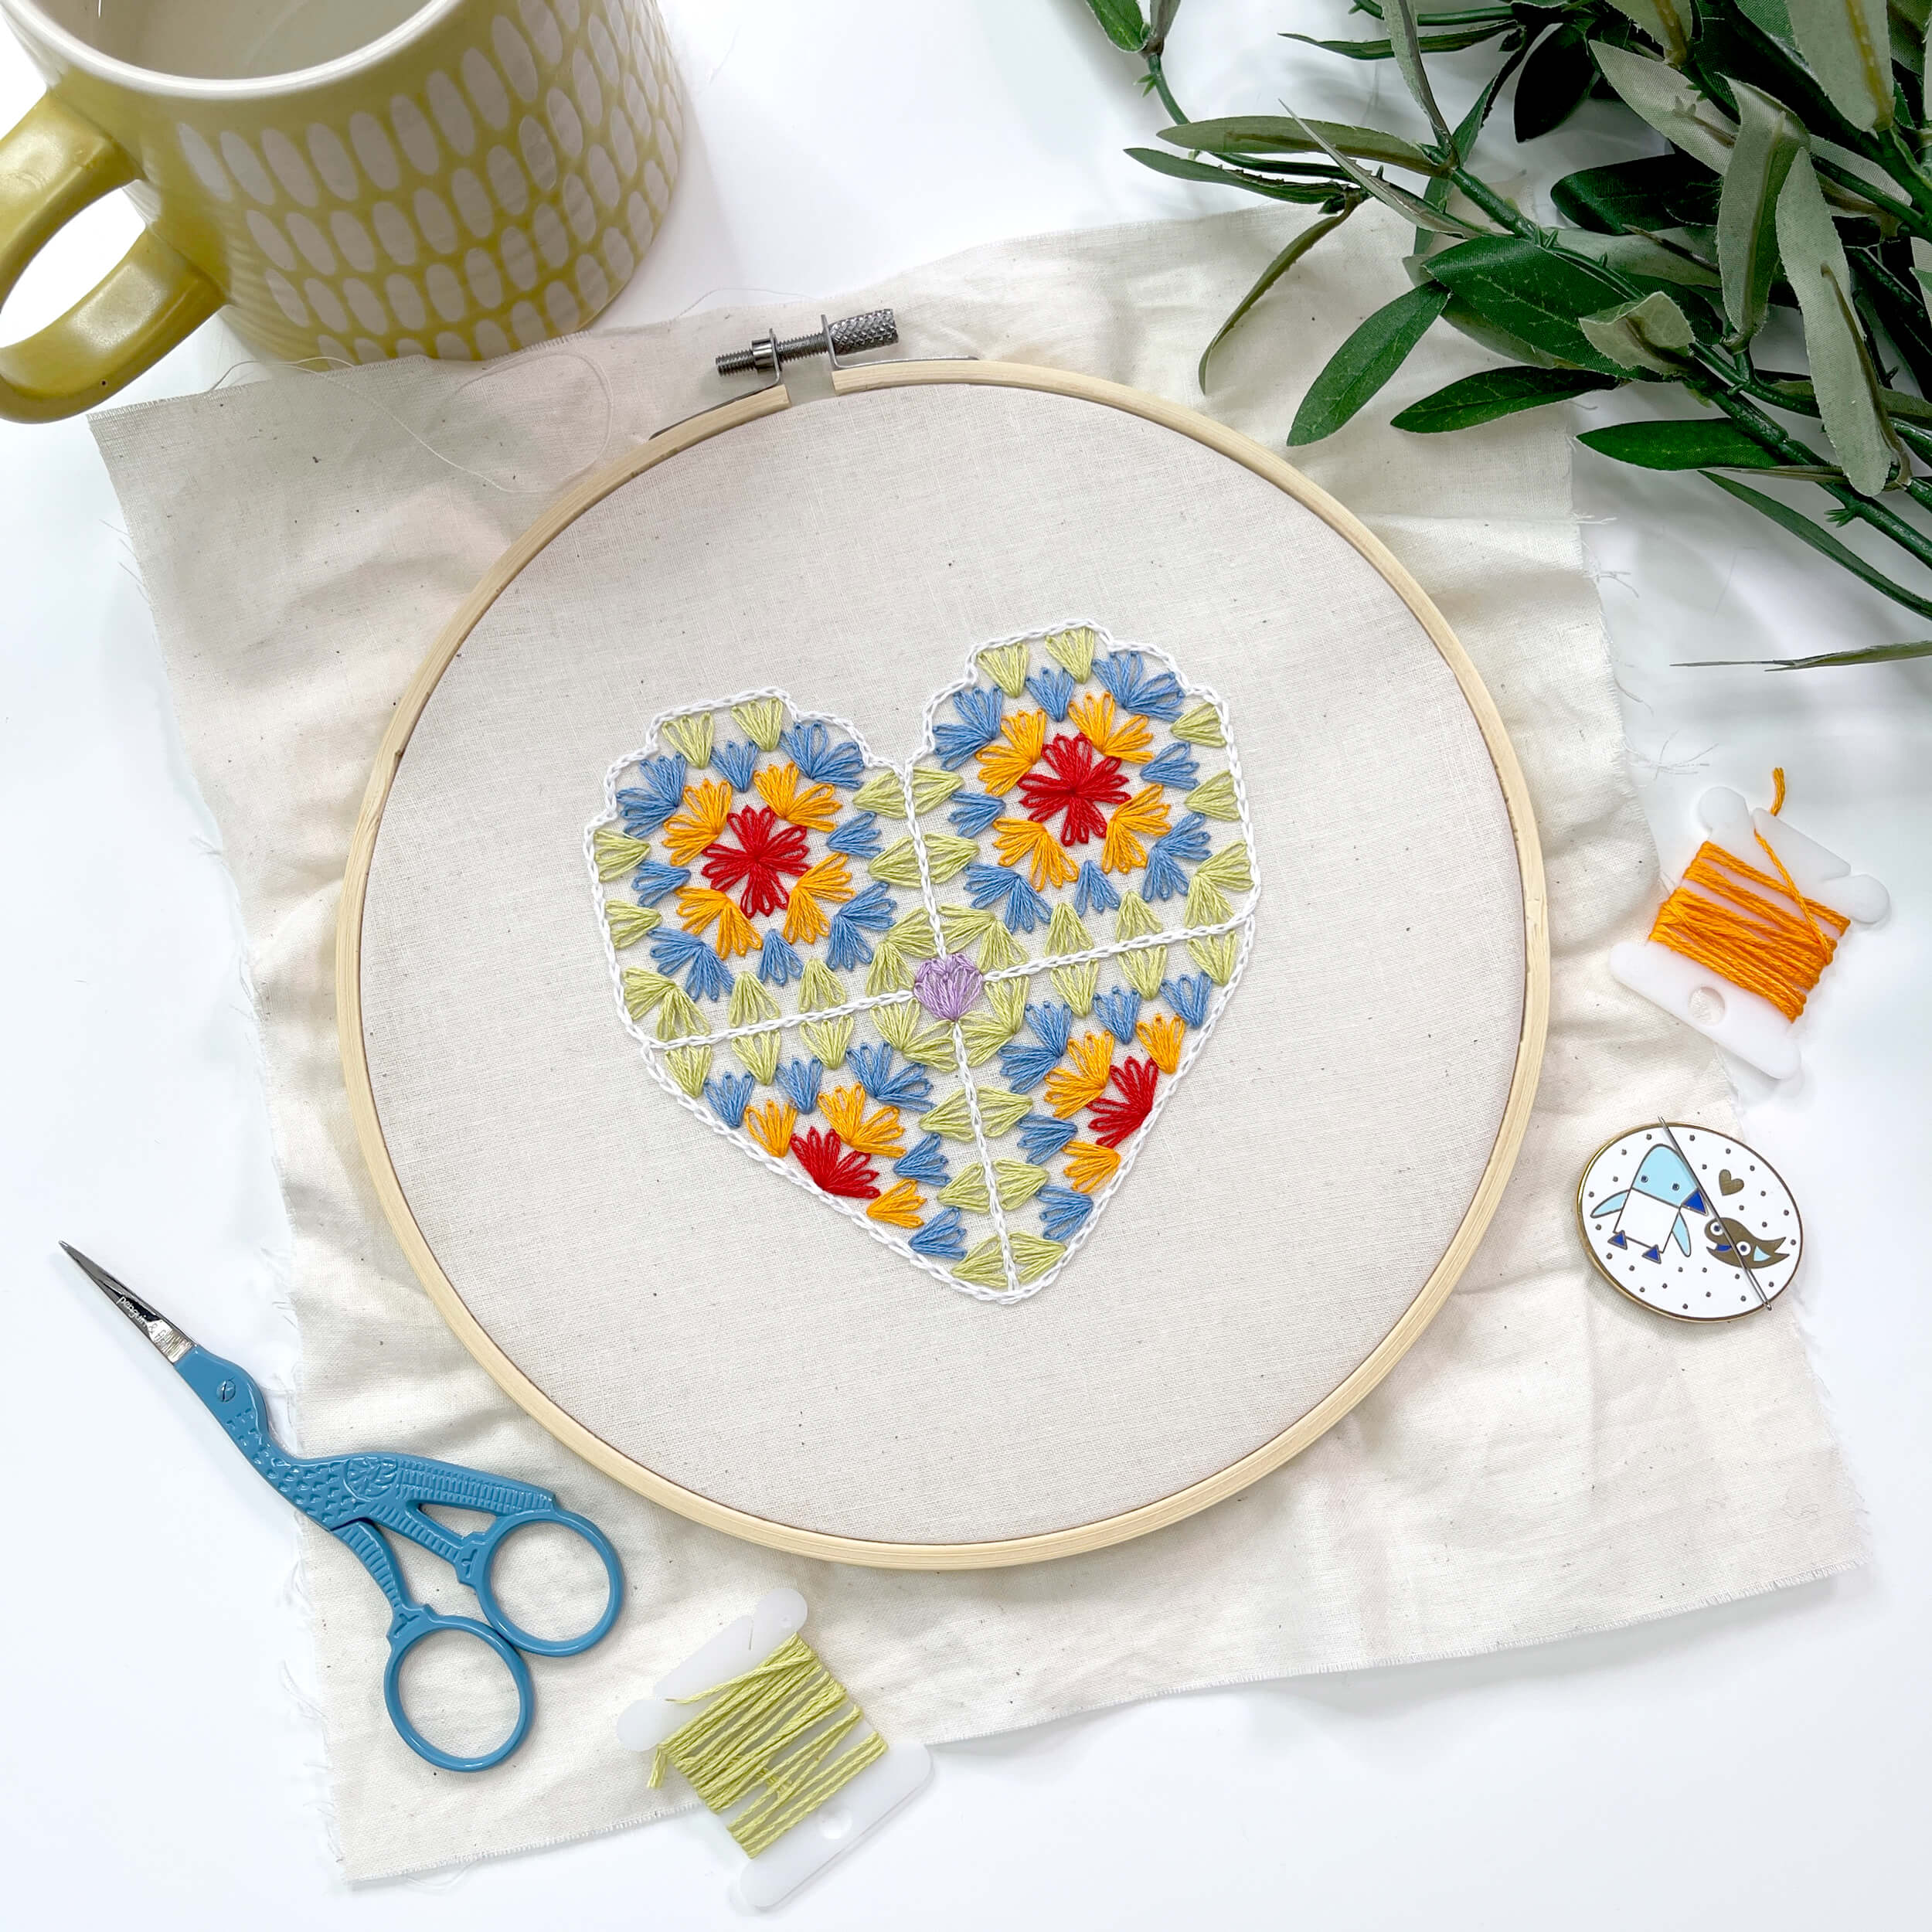 Guide to Granny Crochet: Squares, Circles, Hearts, Stripes and